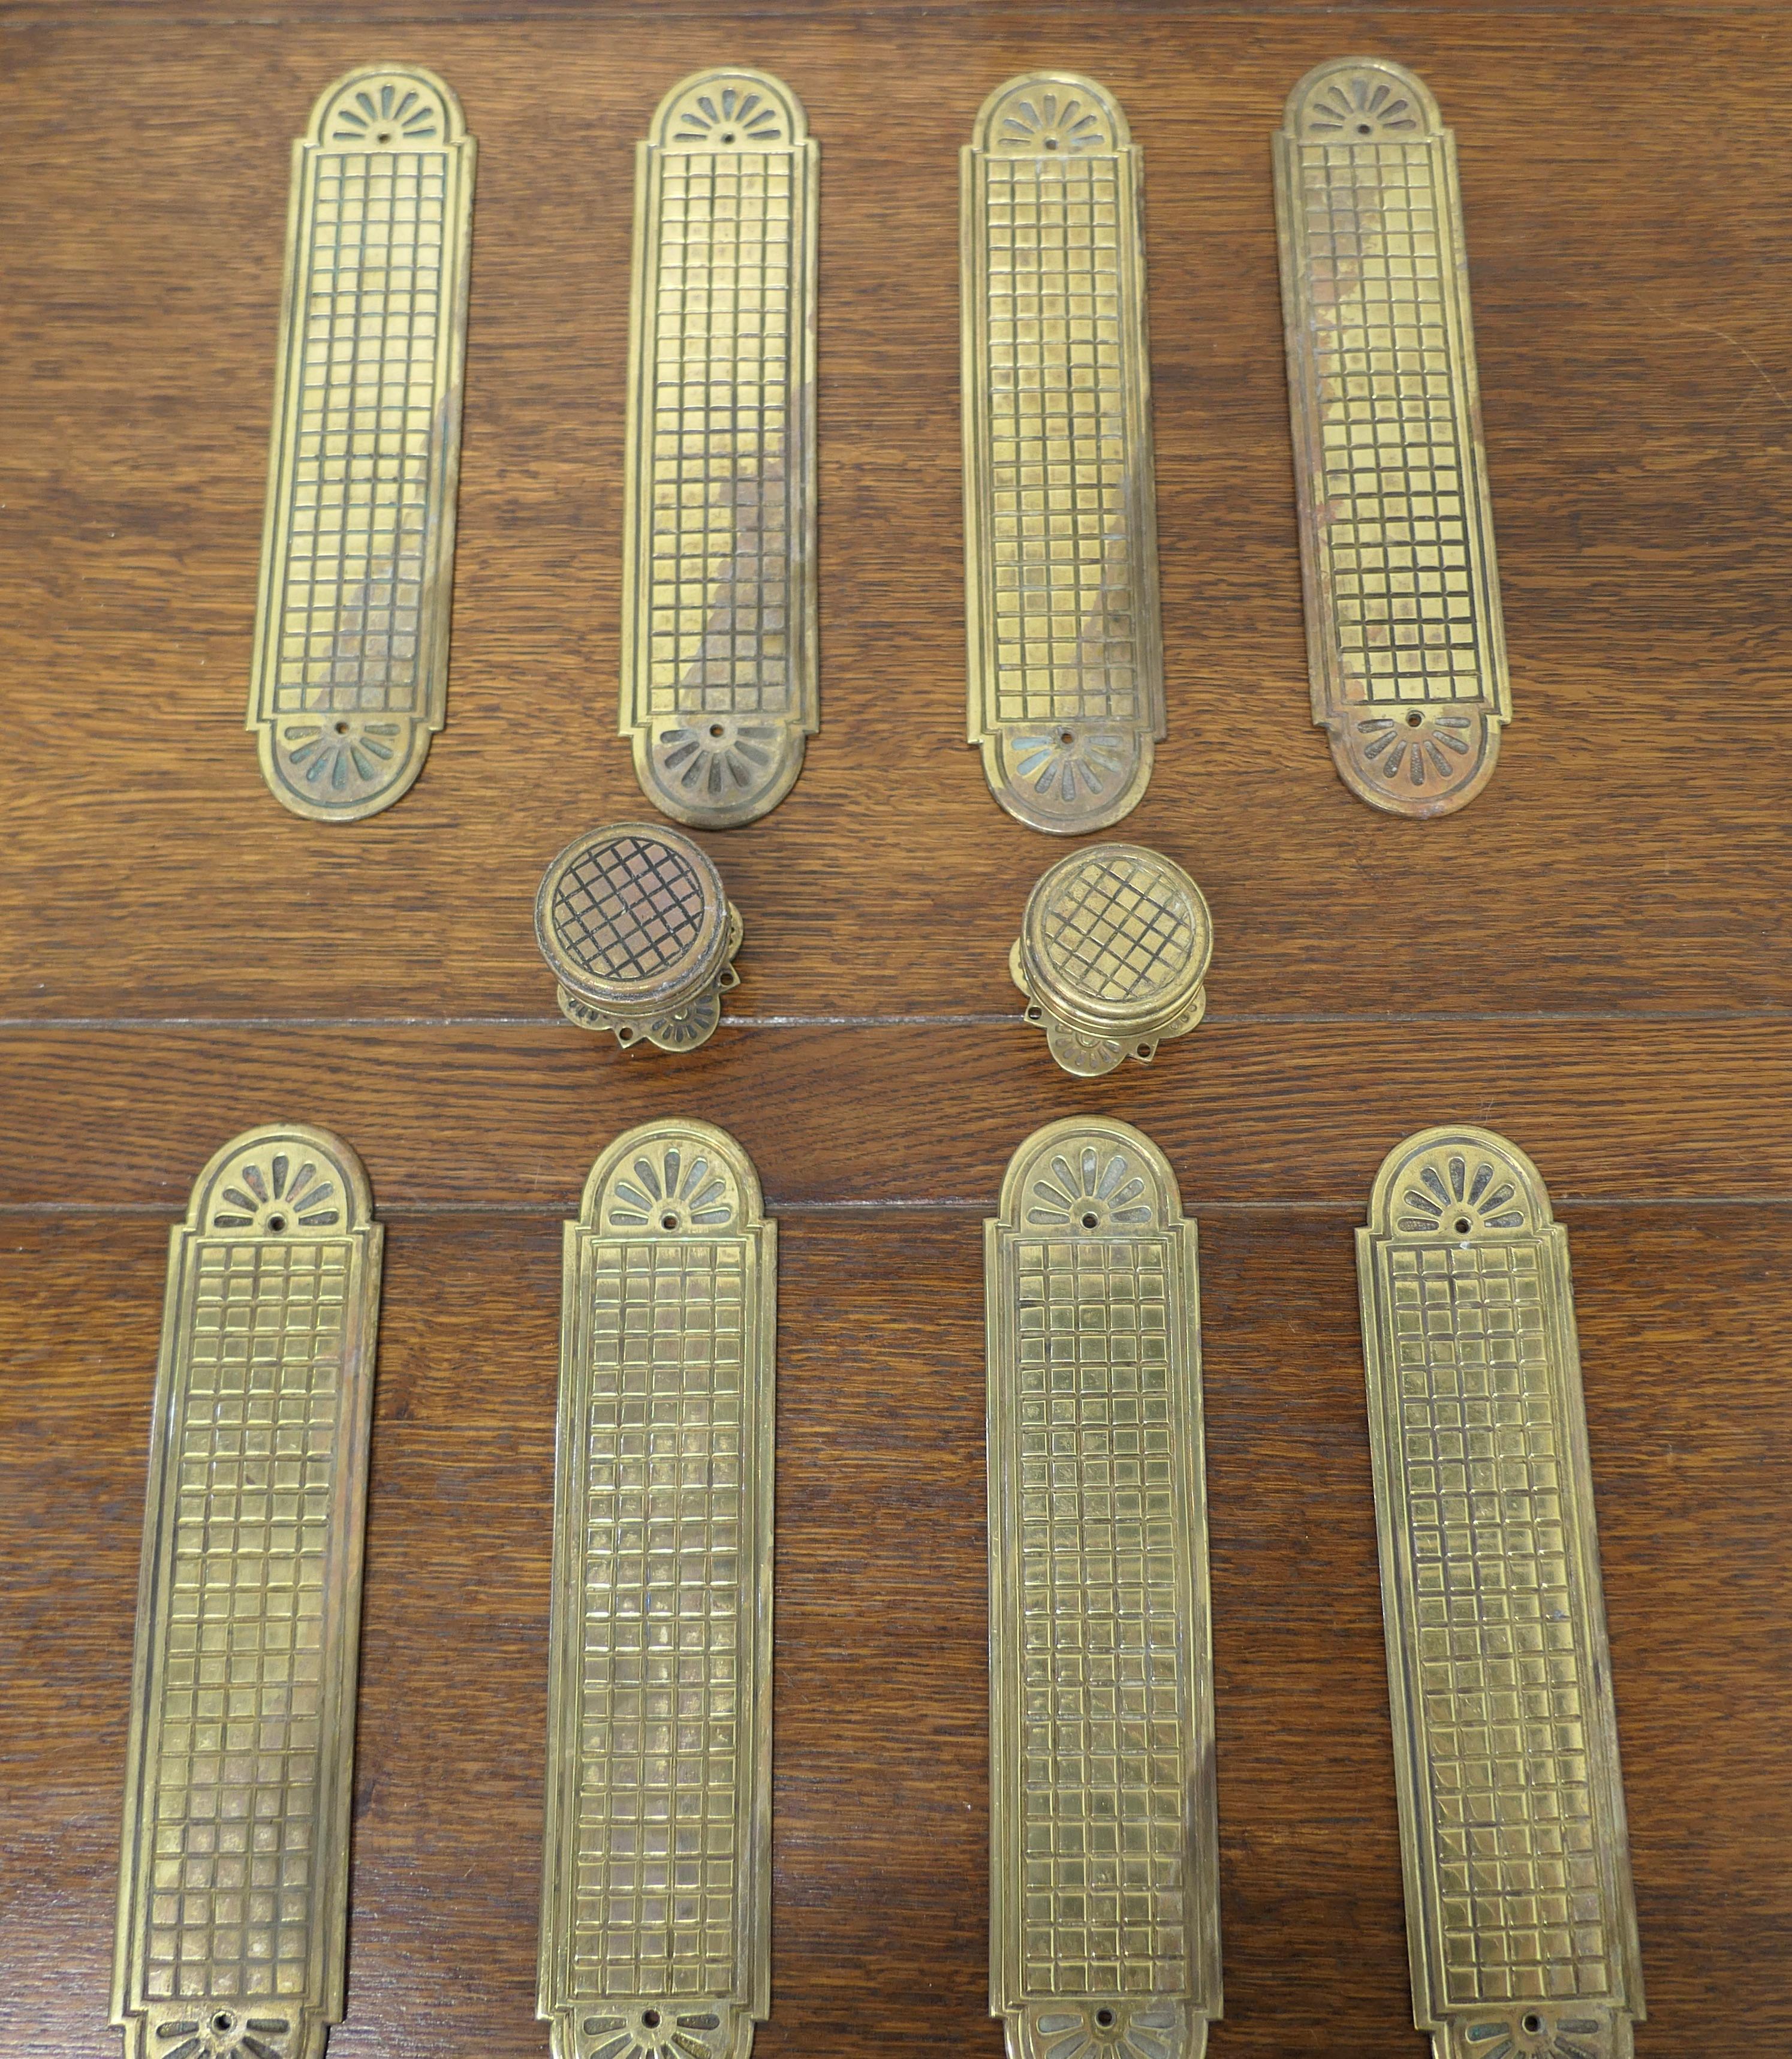 A set of 19th century Arts and Crafts brass door finger plates and knobs

There are 8 identical plates in this set, they are heavy and made in heavy brass, they have a lattice decoration and the top and bottom have a rounded shape, they have 2